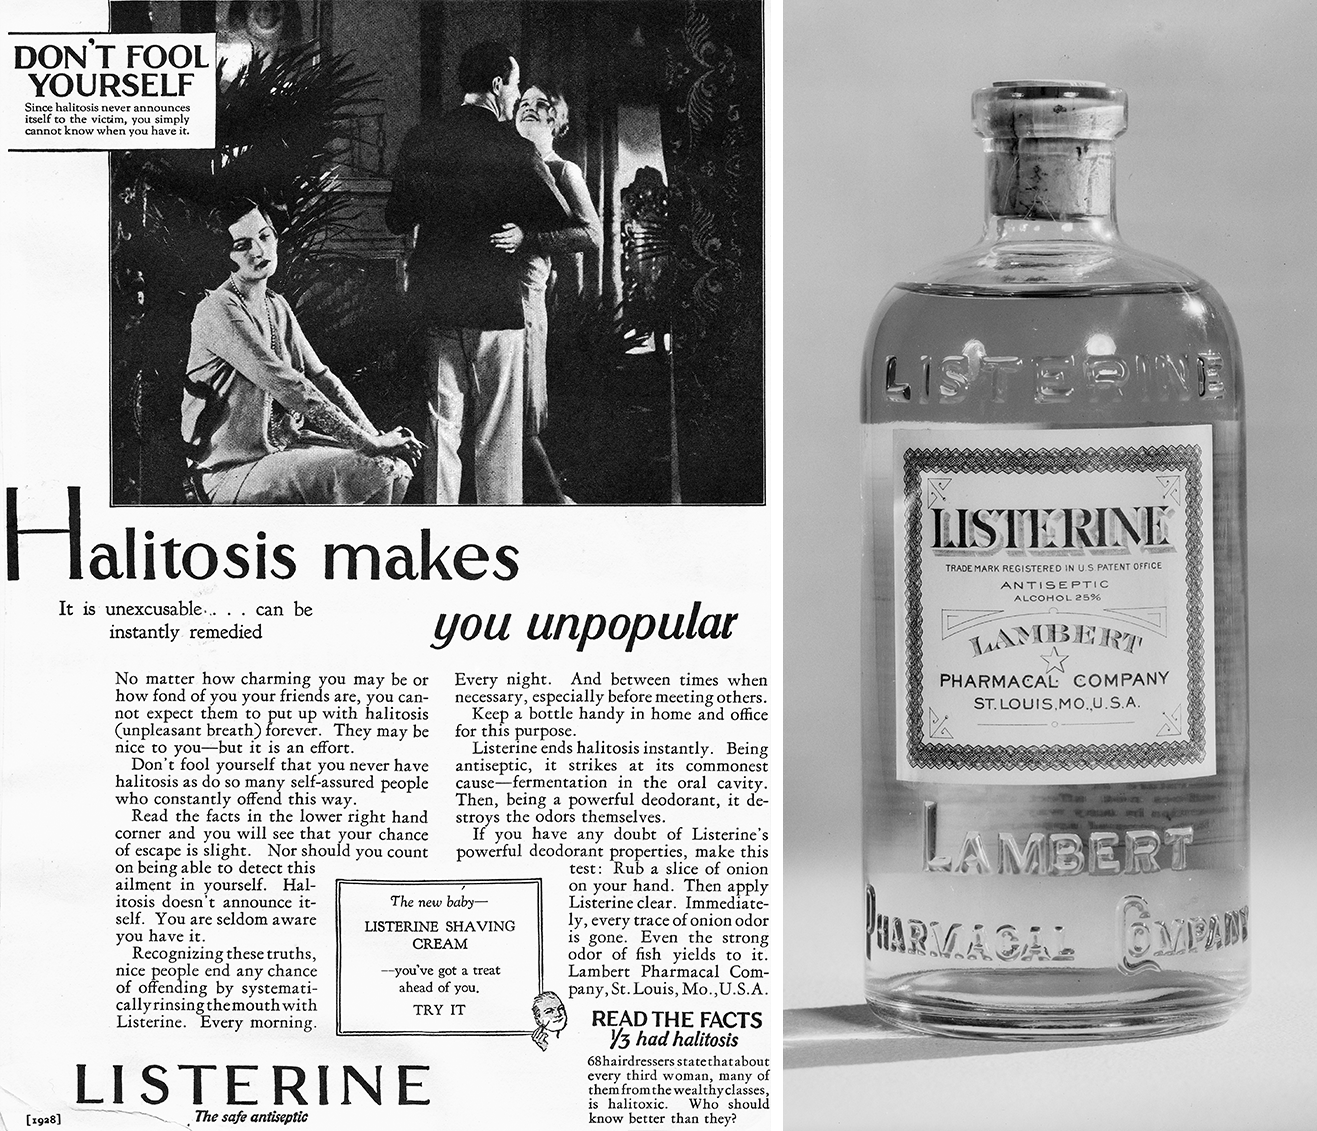 An ad for Listerine and a bottle of Listerine